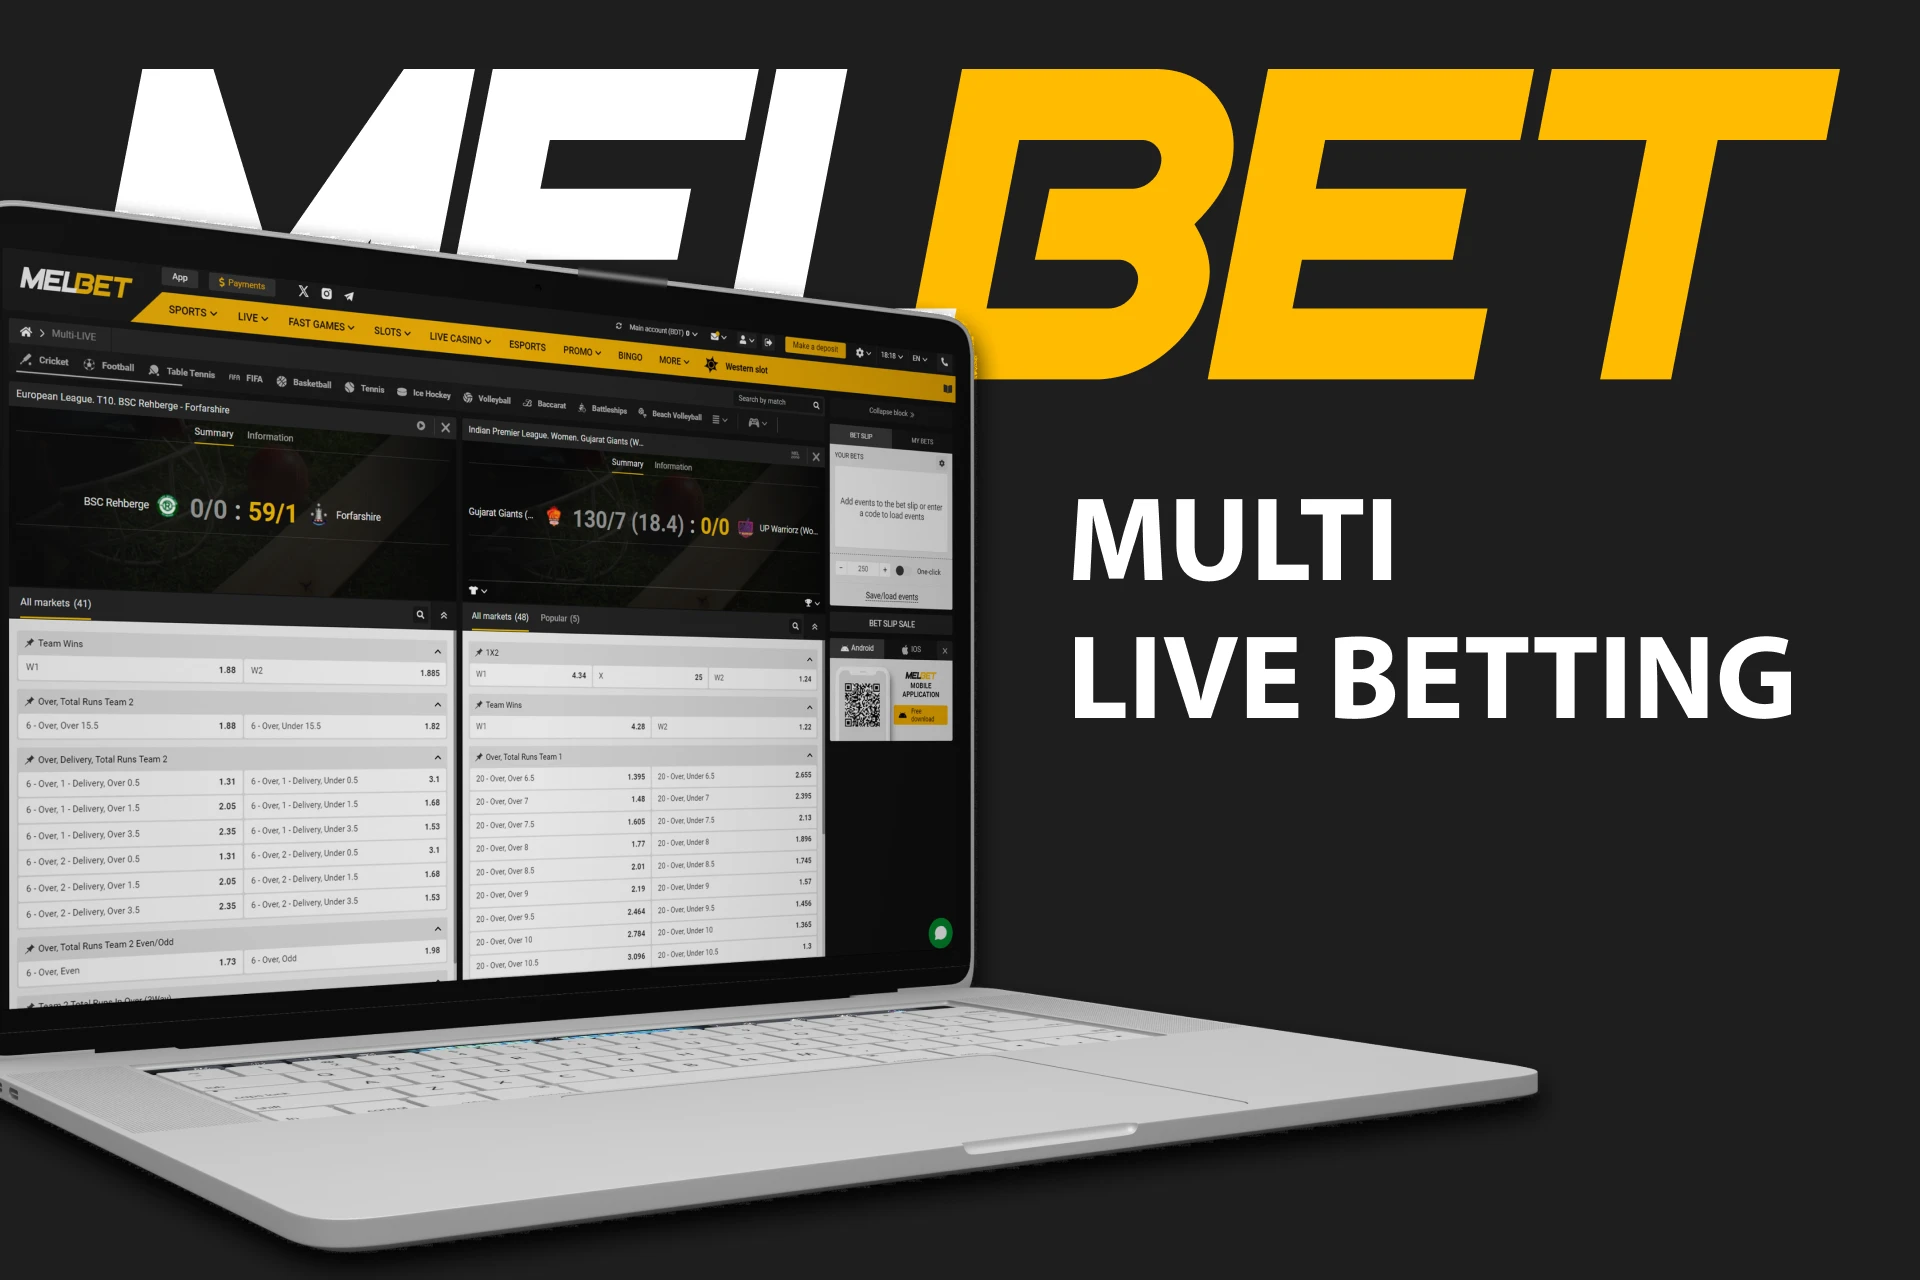 You can bet with multi live betting option at Melbet.